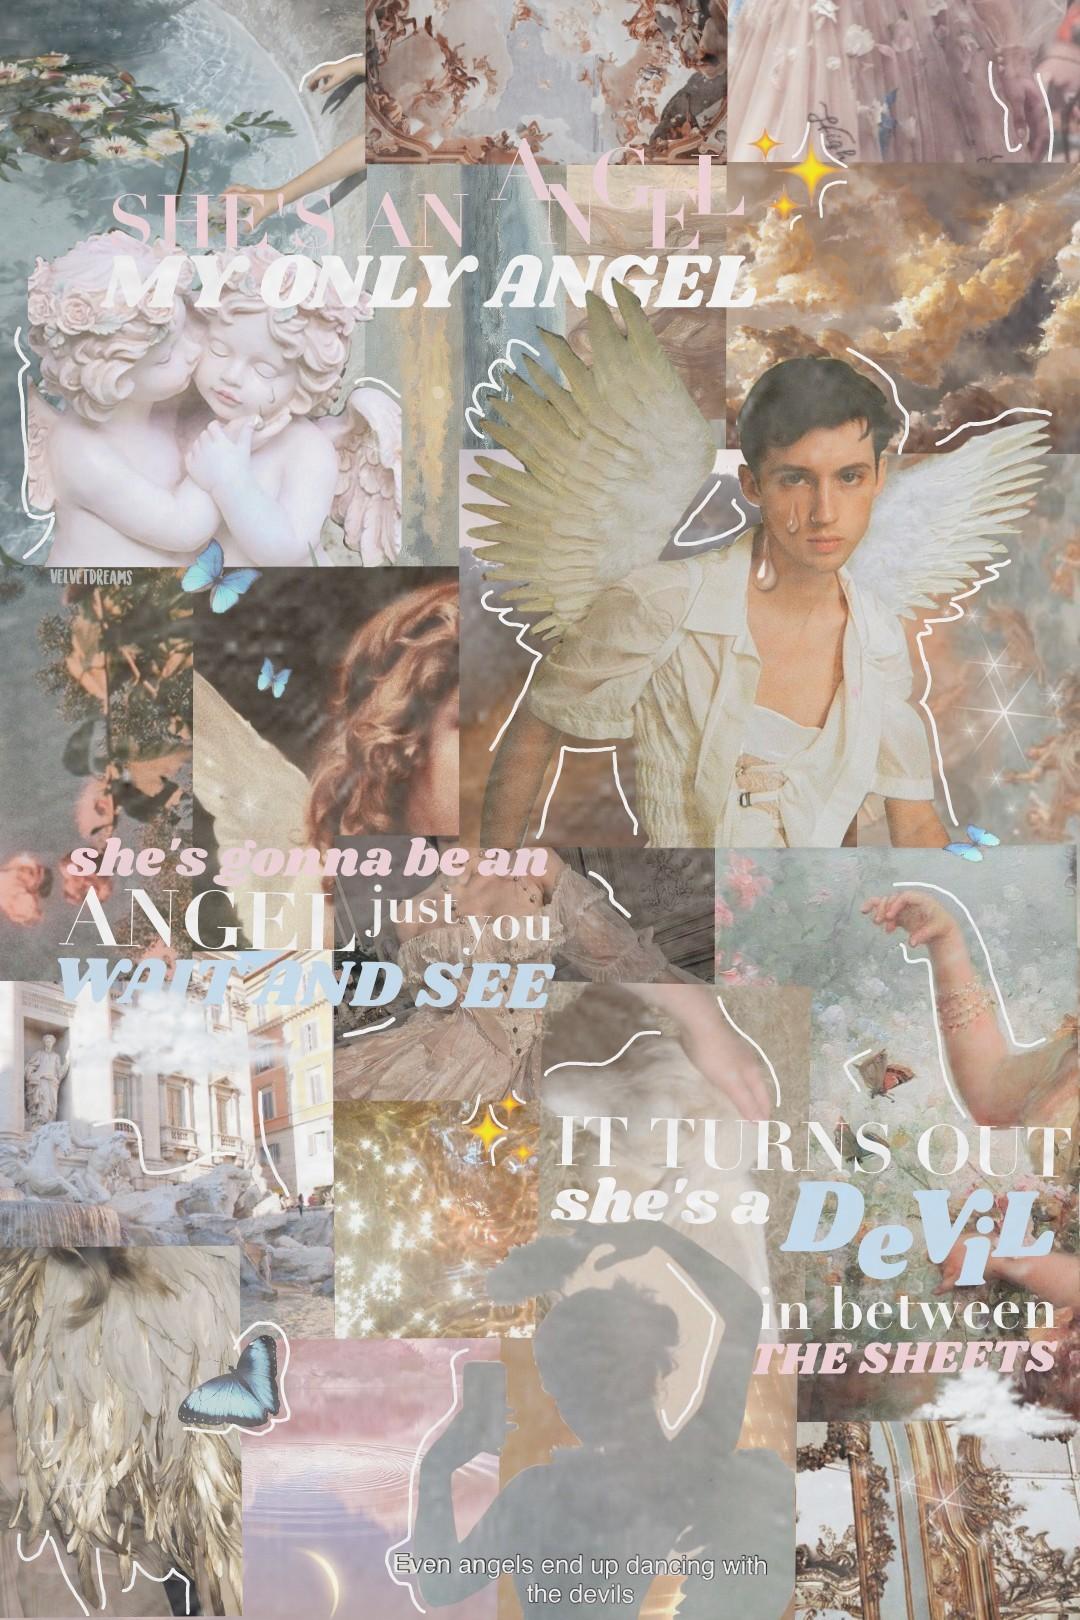 repost coz i'm dumb and made a typo lol - this took AGES but i kinda like it? 👼🏼✨ lyrics are harry styles only angel, his whole debut album BANGS 🤩 inspired by a lot of collages ive been seeing on pc. let me know what u think!! #pconly